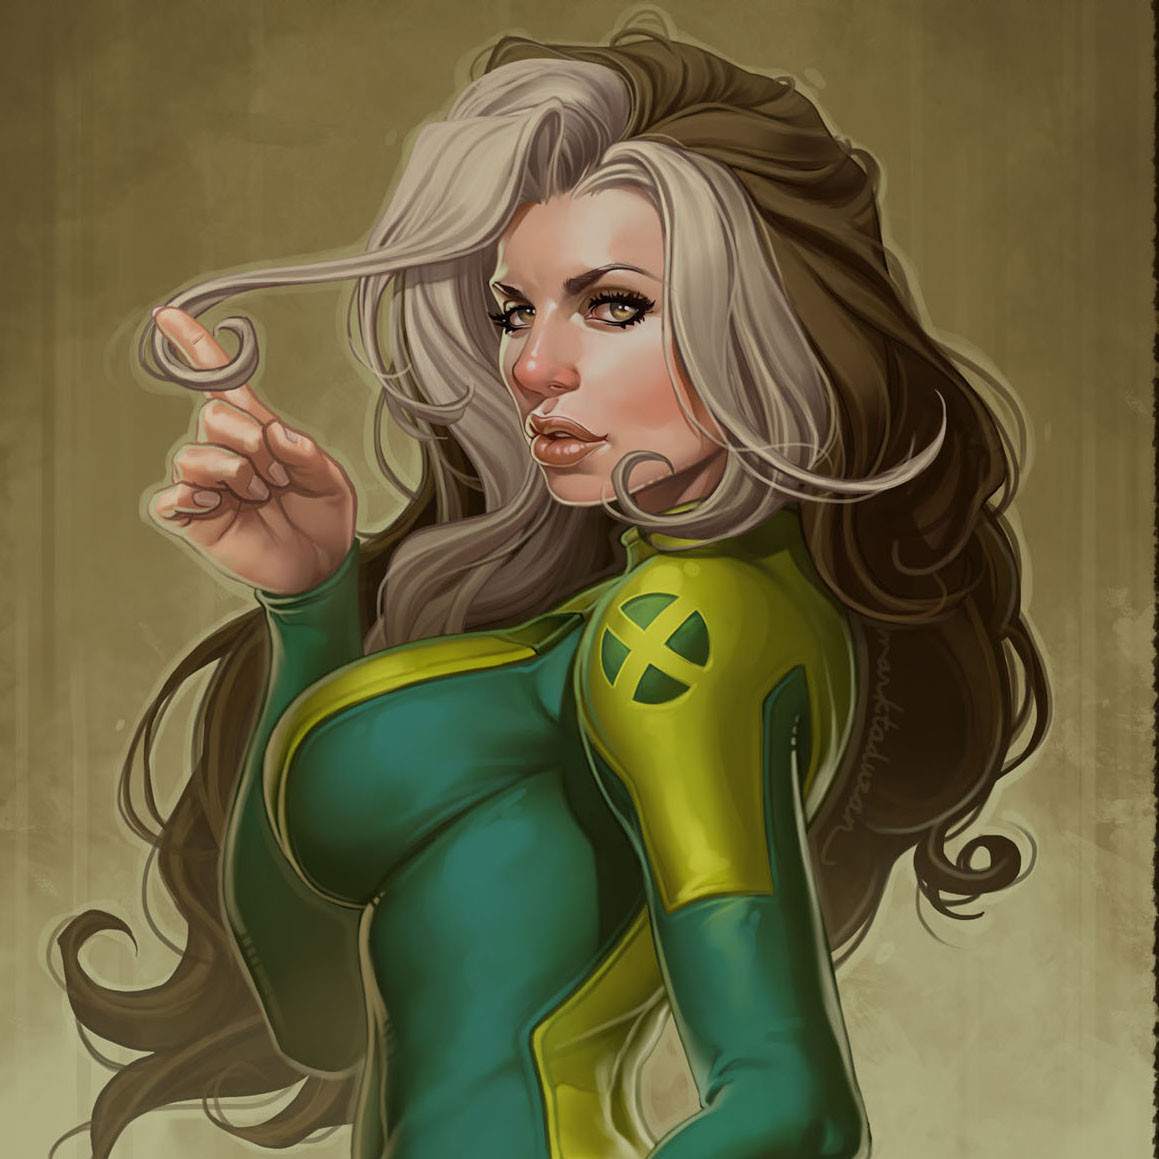 Rogue (X-Men) by Markovah.